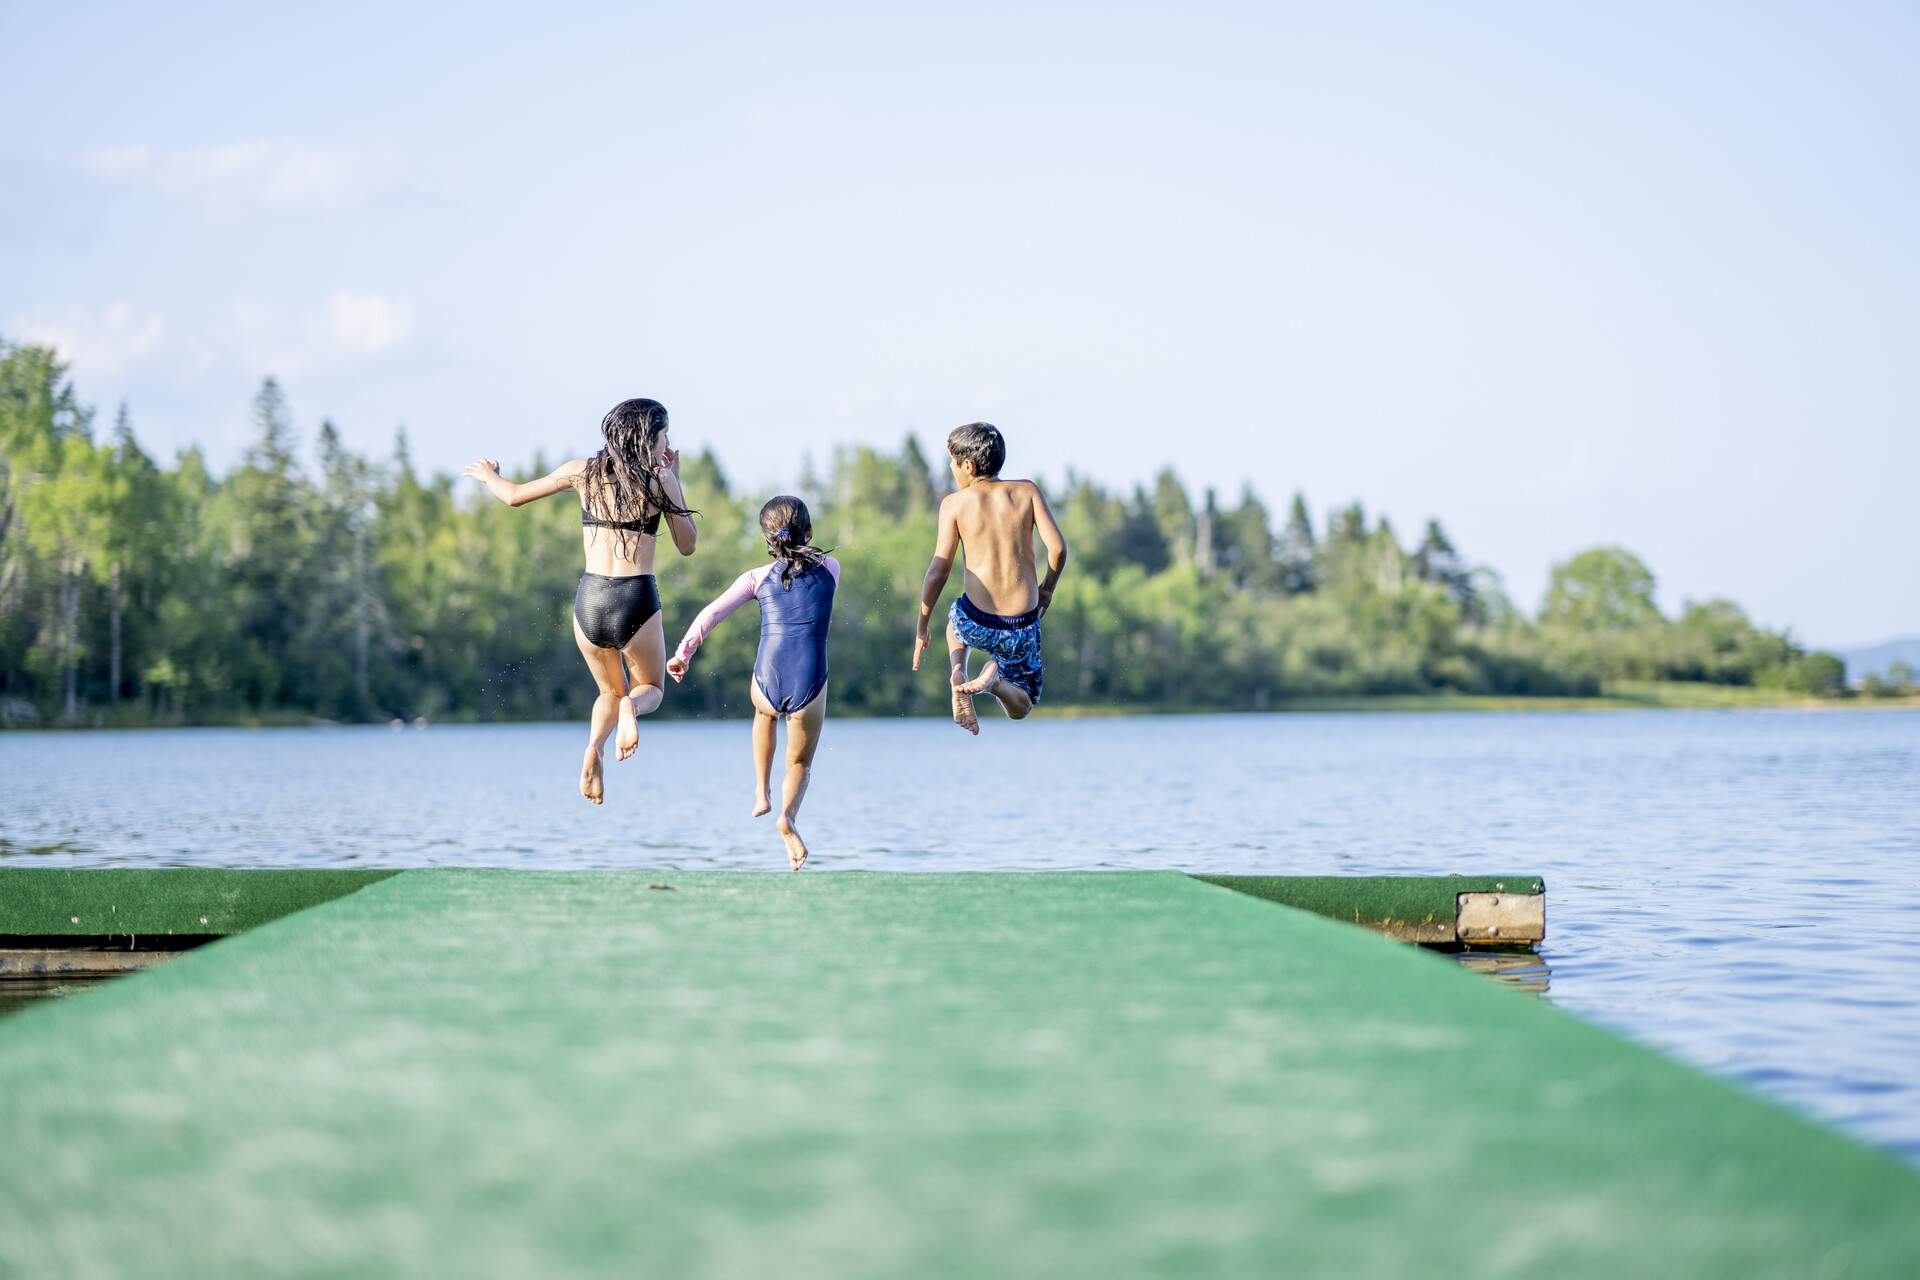 Three children in swimsuits leap into a lake from a jetty.